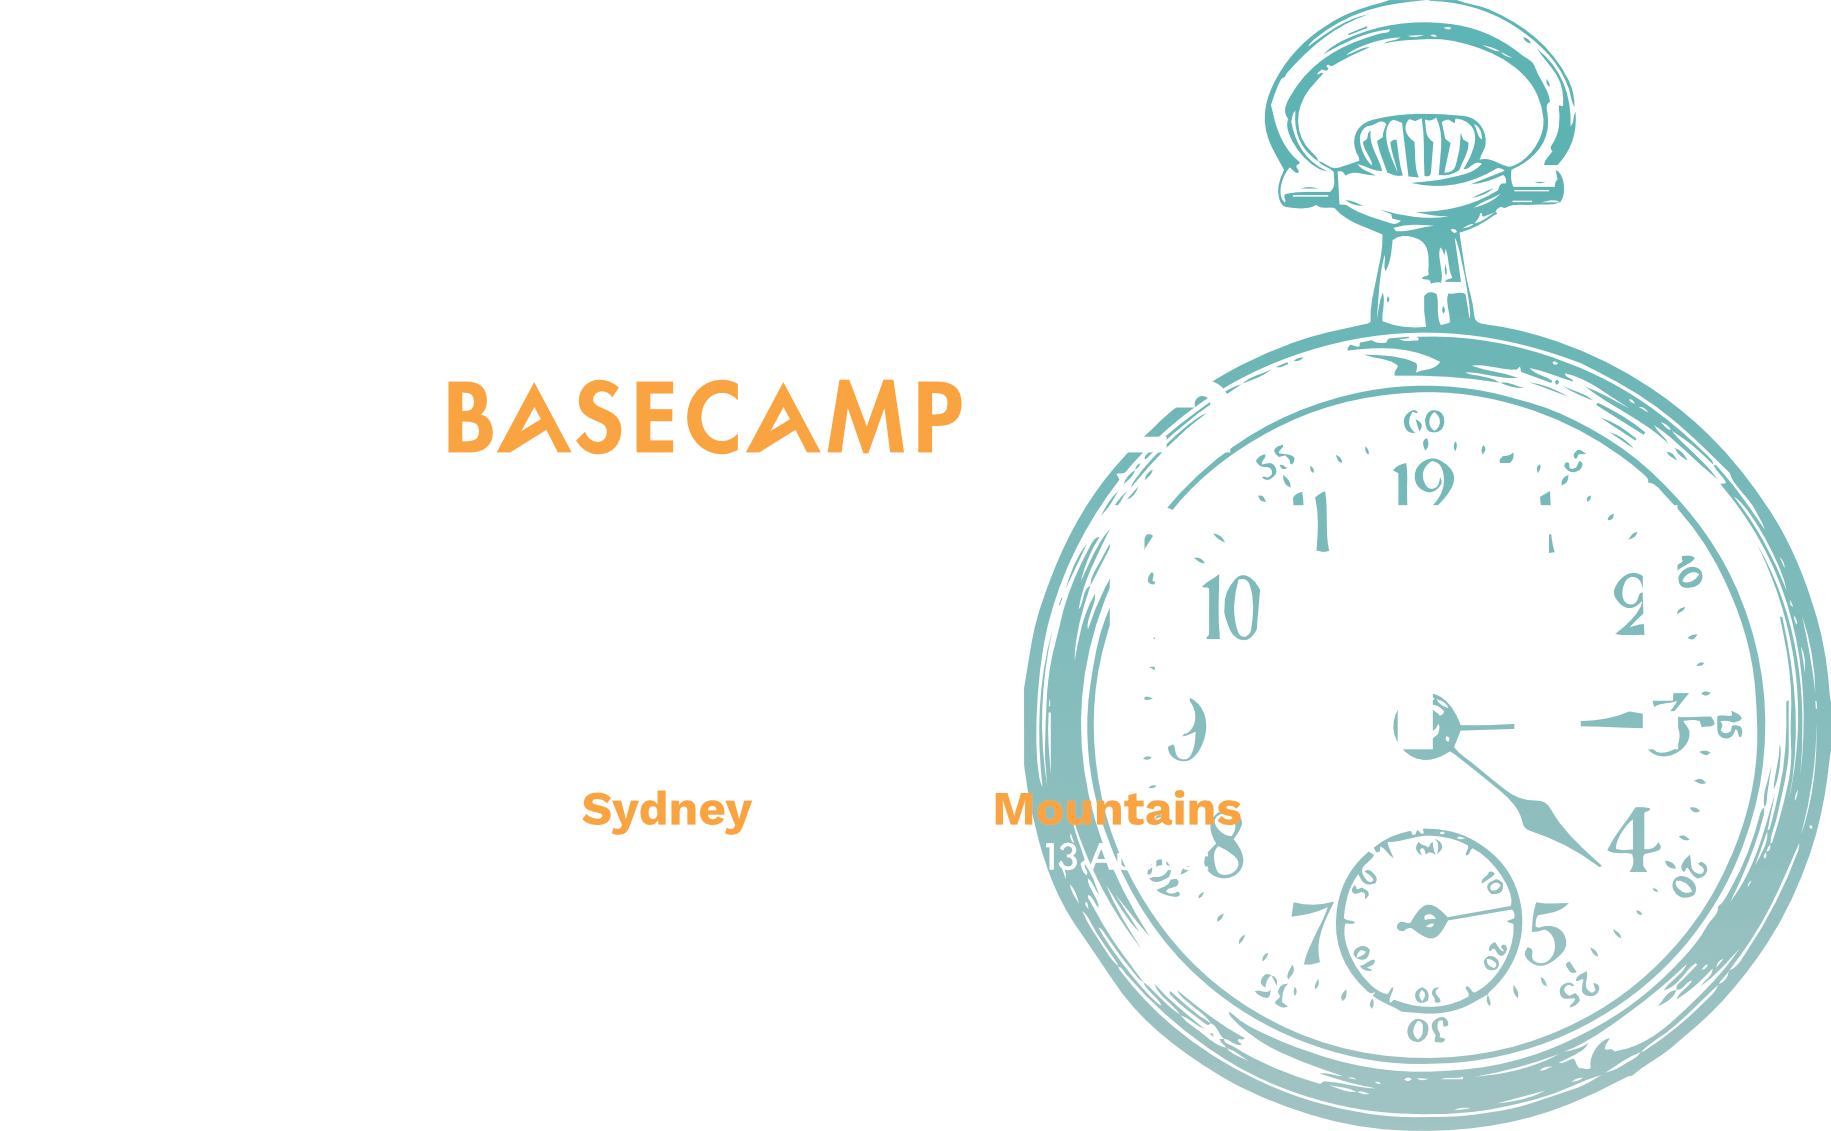 basecamp 2022 save the date elements